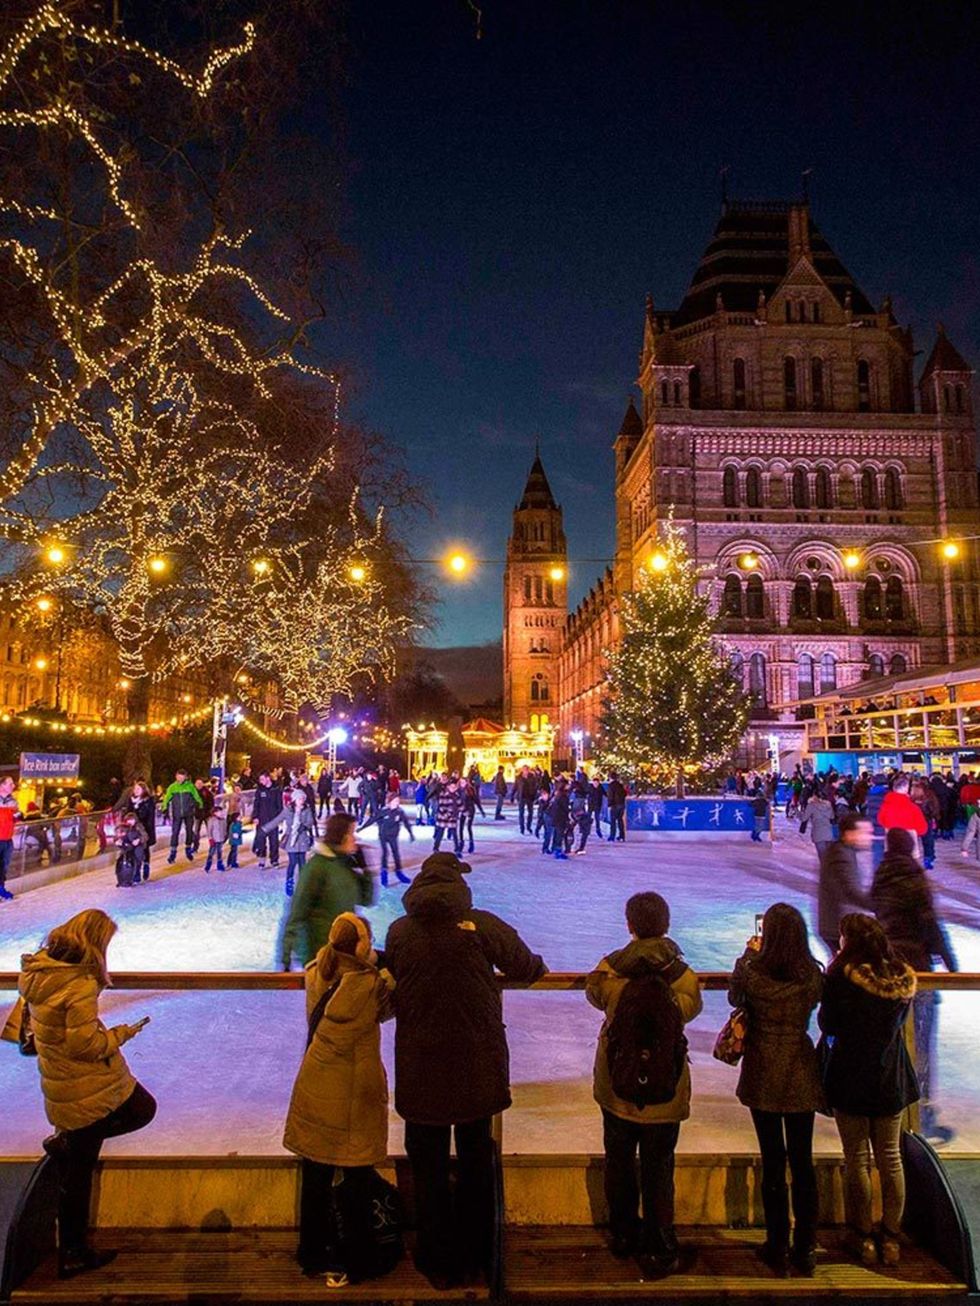 <p><strong>GOING OUT: Natural History Museum Ice Skating</strong></p>

<p>No winter in London is complete without a customary trip to one of the citys ephemeral ice rinks. Every year we return with hopes anew of channelling our inner <em>Blades Of Glory<